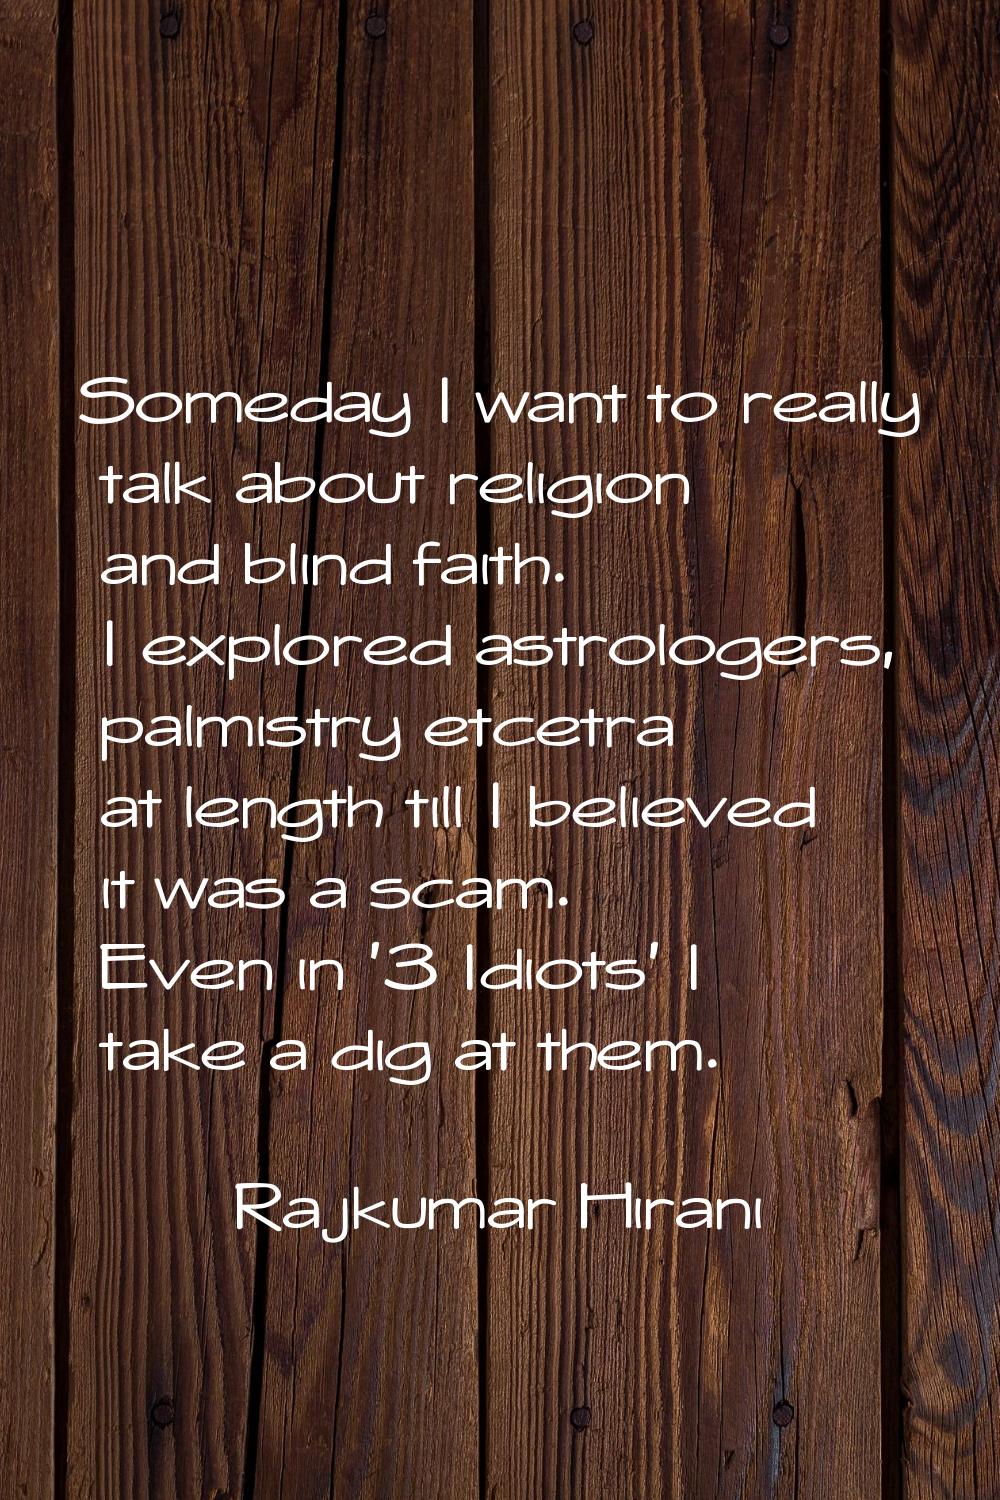 Someday I want to really talk about religion and blind faith. I explored astrologers, palmistry etc